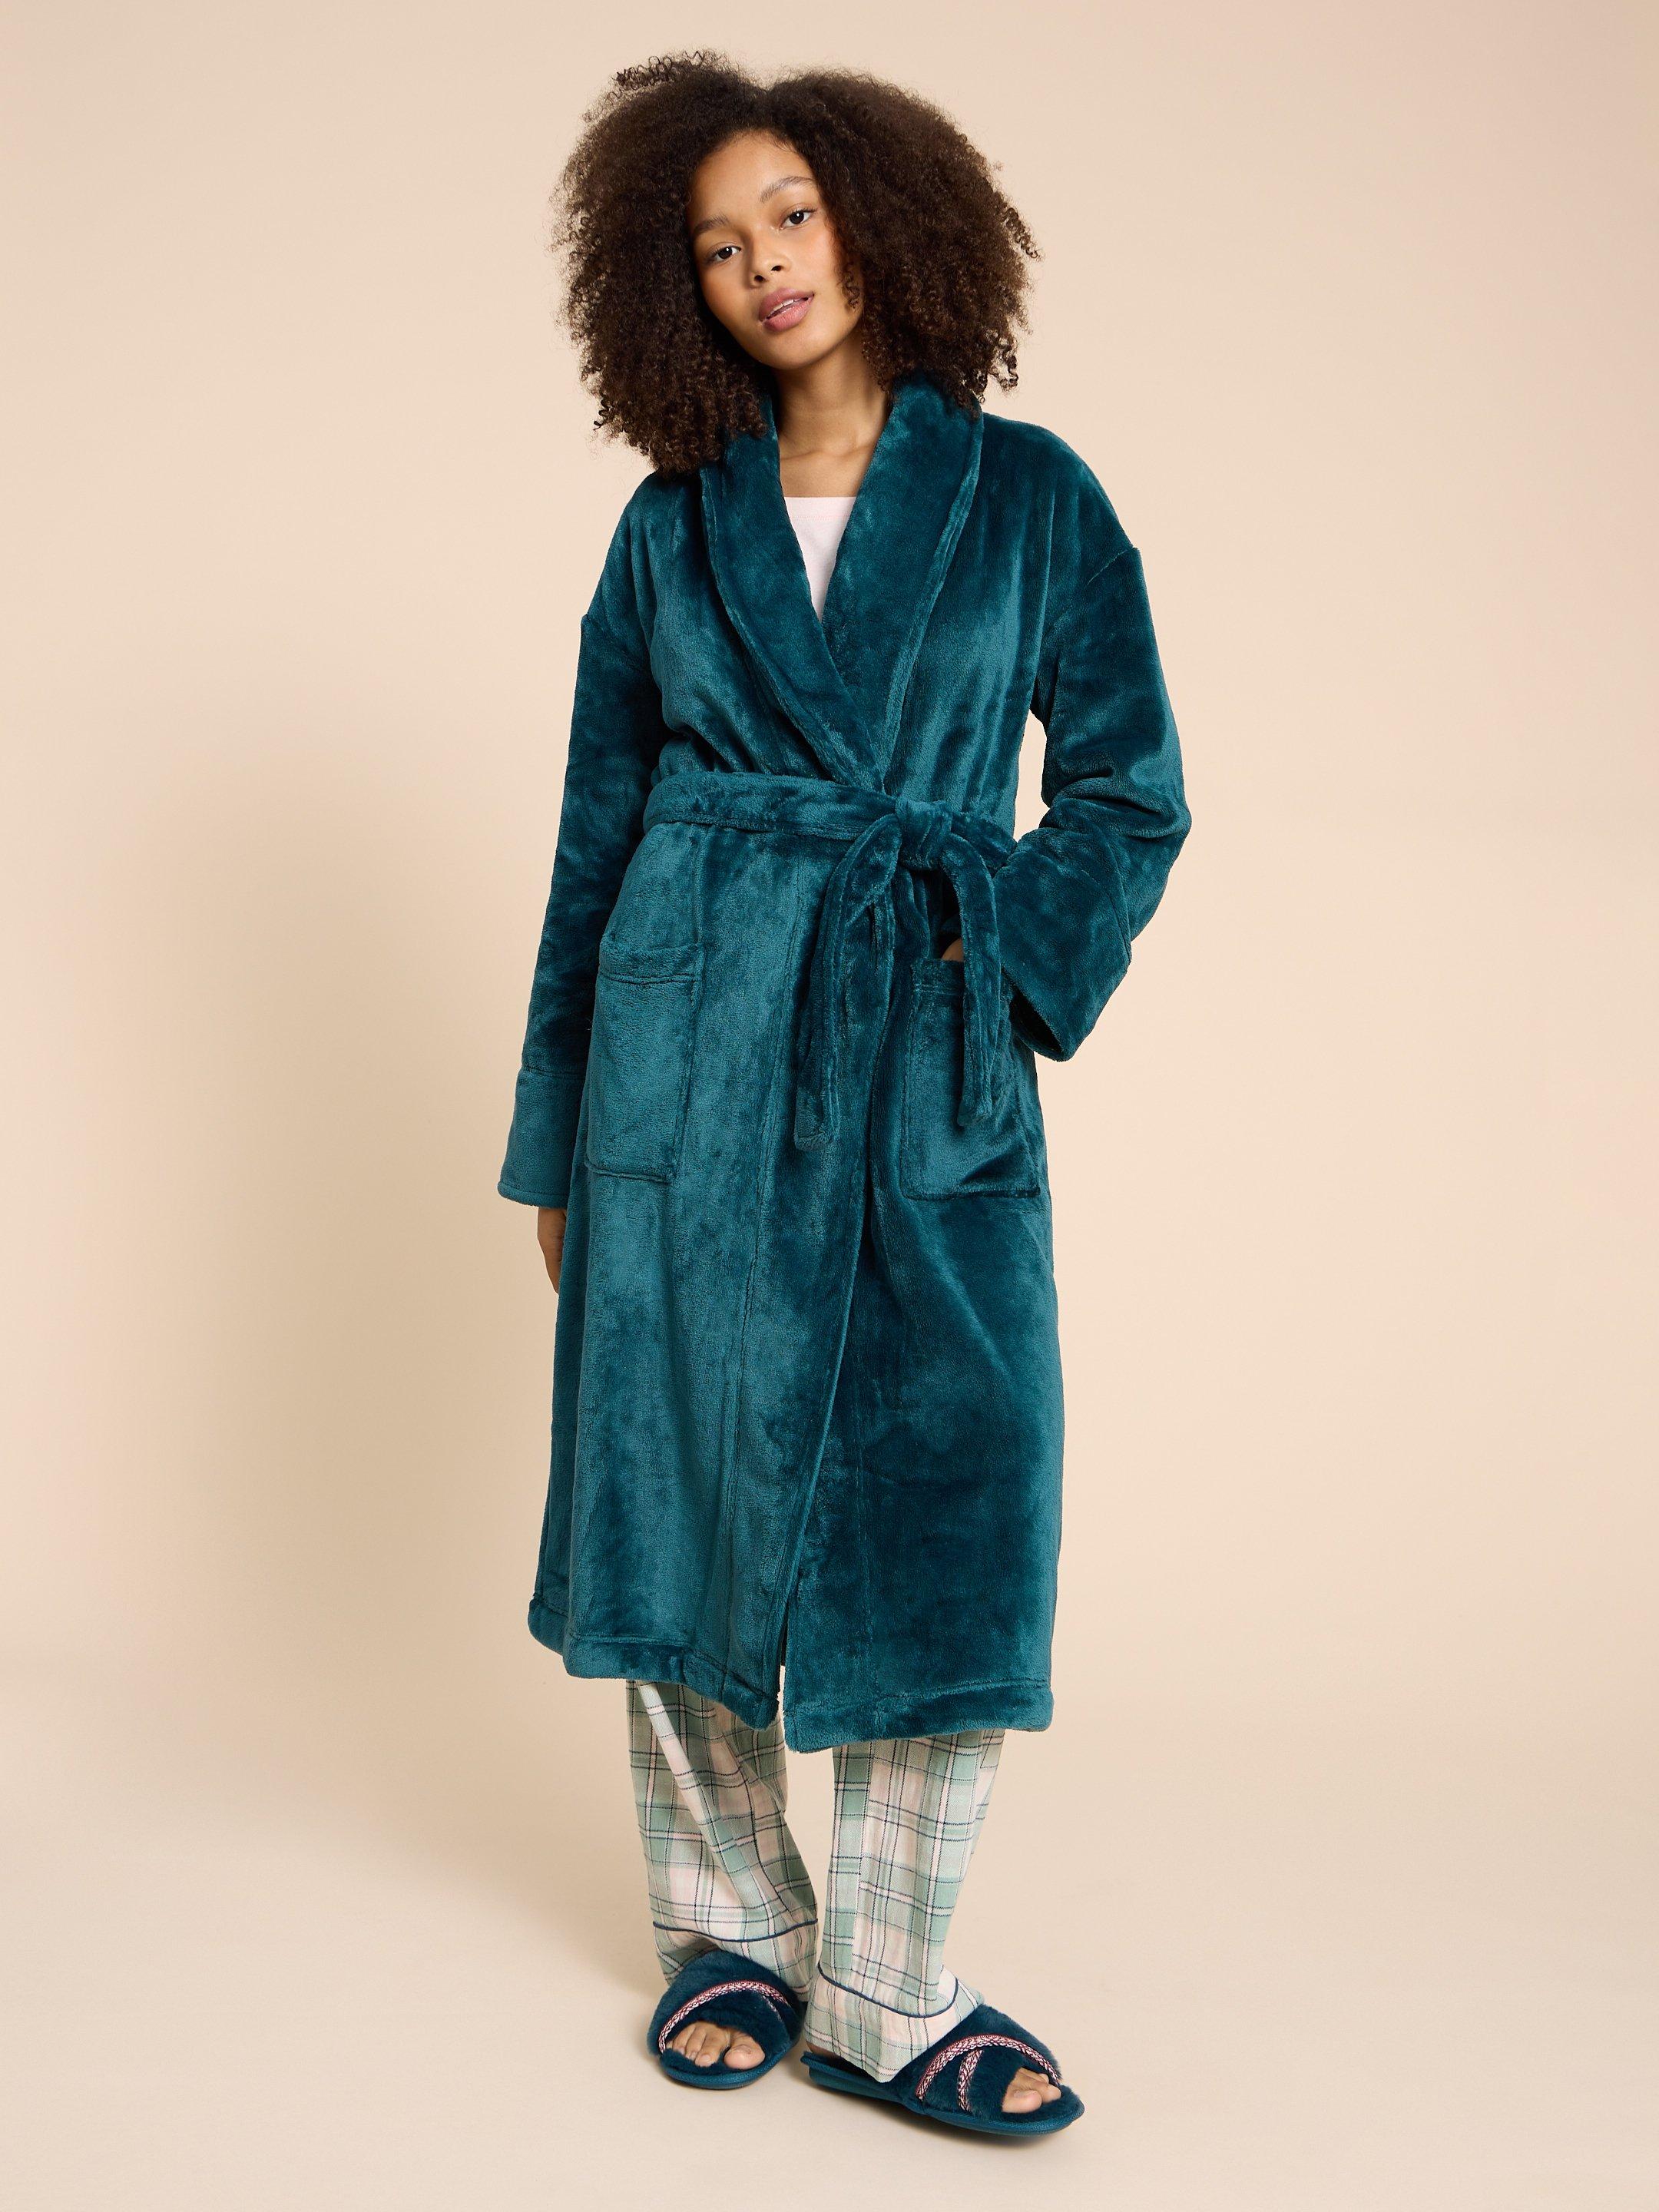 Clover Cosy Dressing Gown in DK TEAL - LIFESTYLE